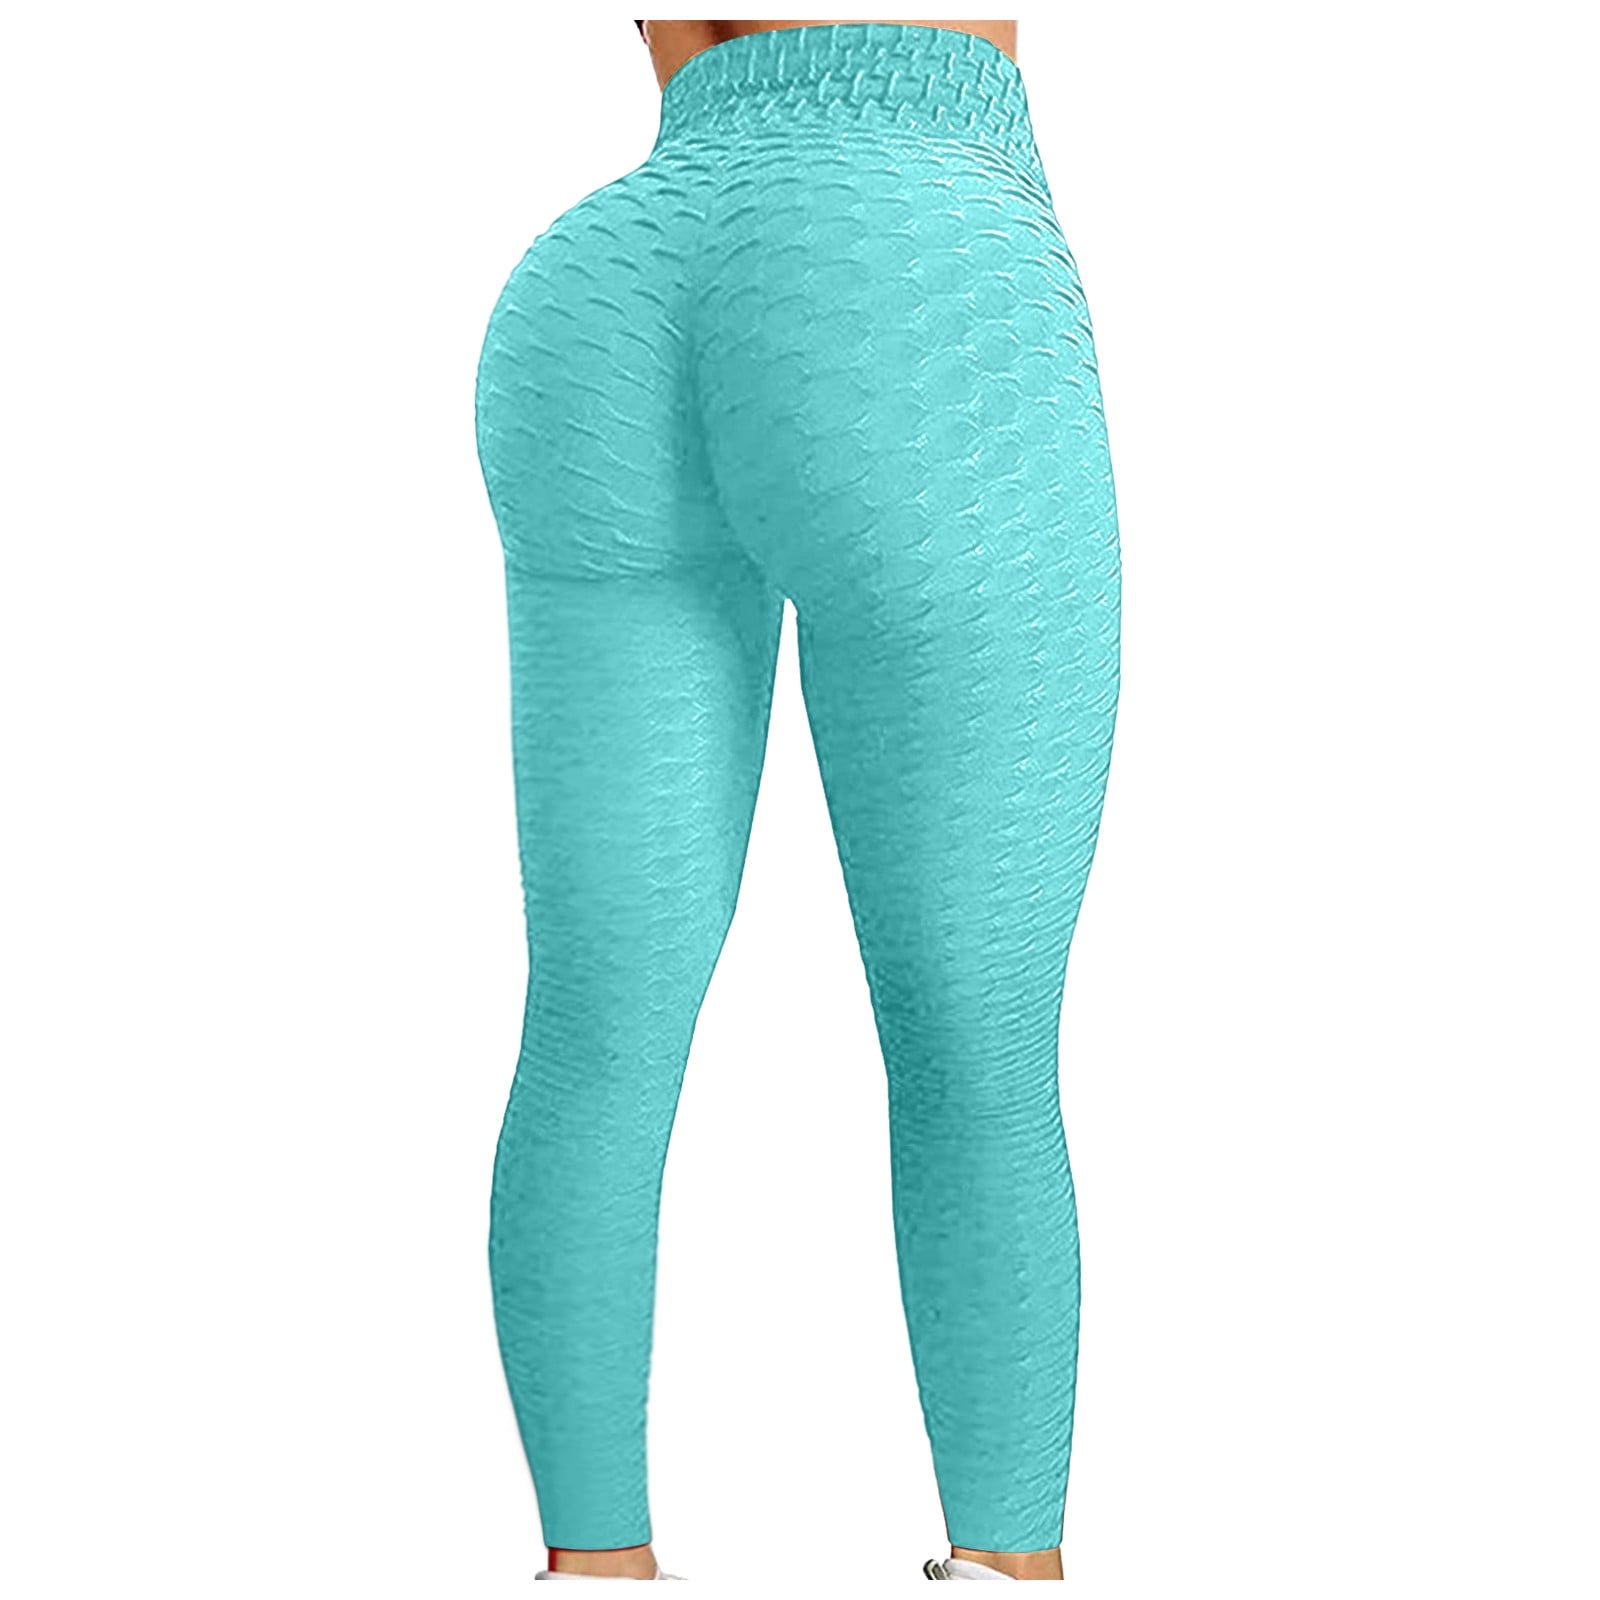 Women's Plus Size Nude Yoga Pants Women's High Waist Hip Lifting Stretch  Fitness Pants Avoid Camel Toes 2024 - $23.99